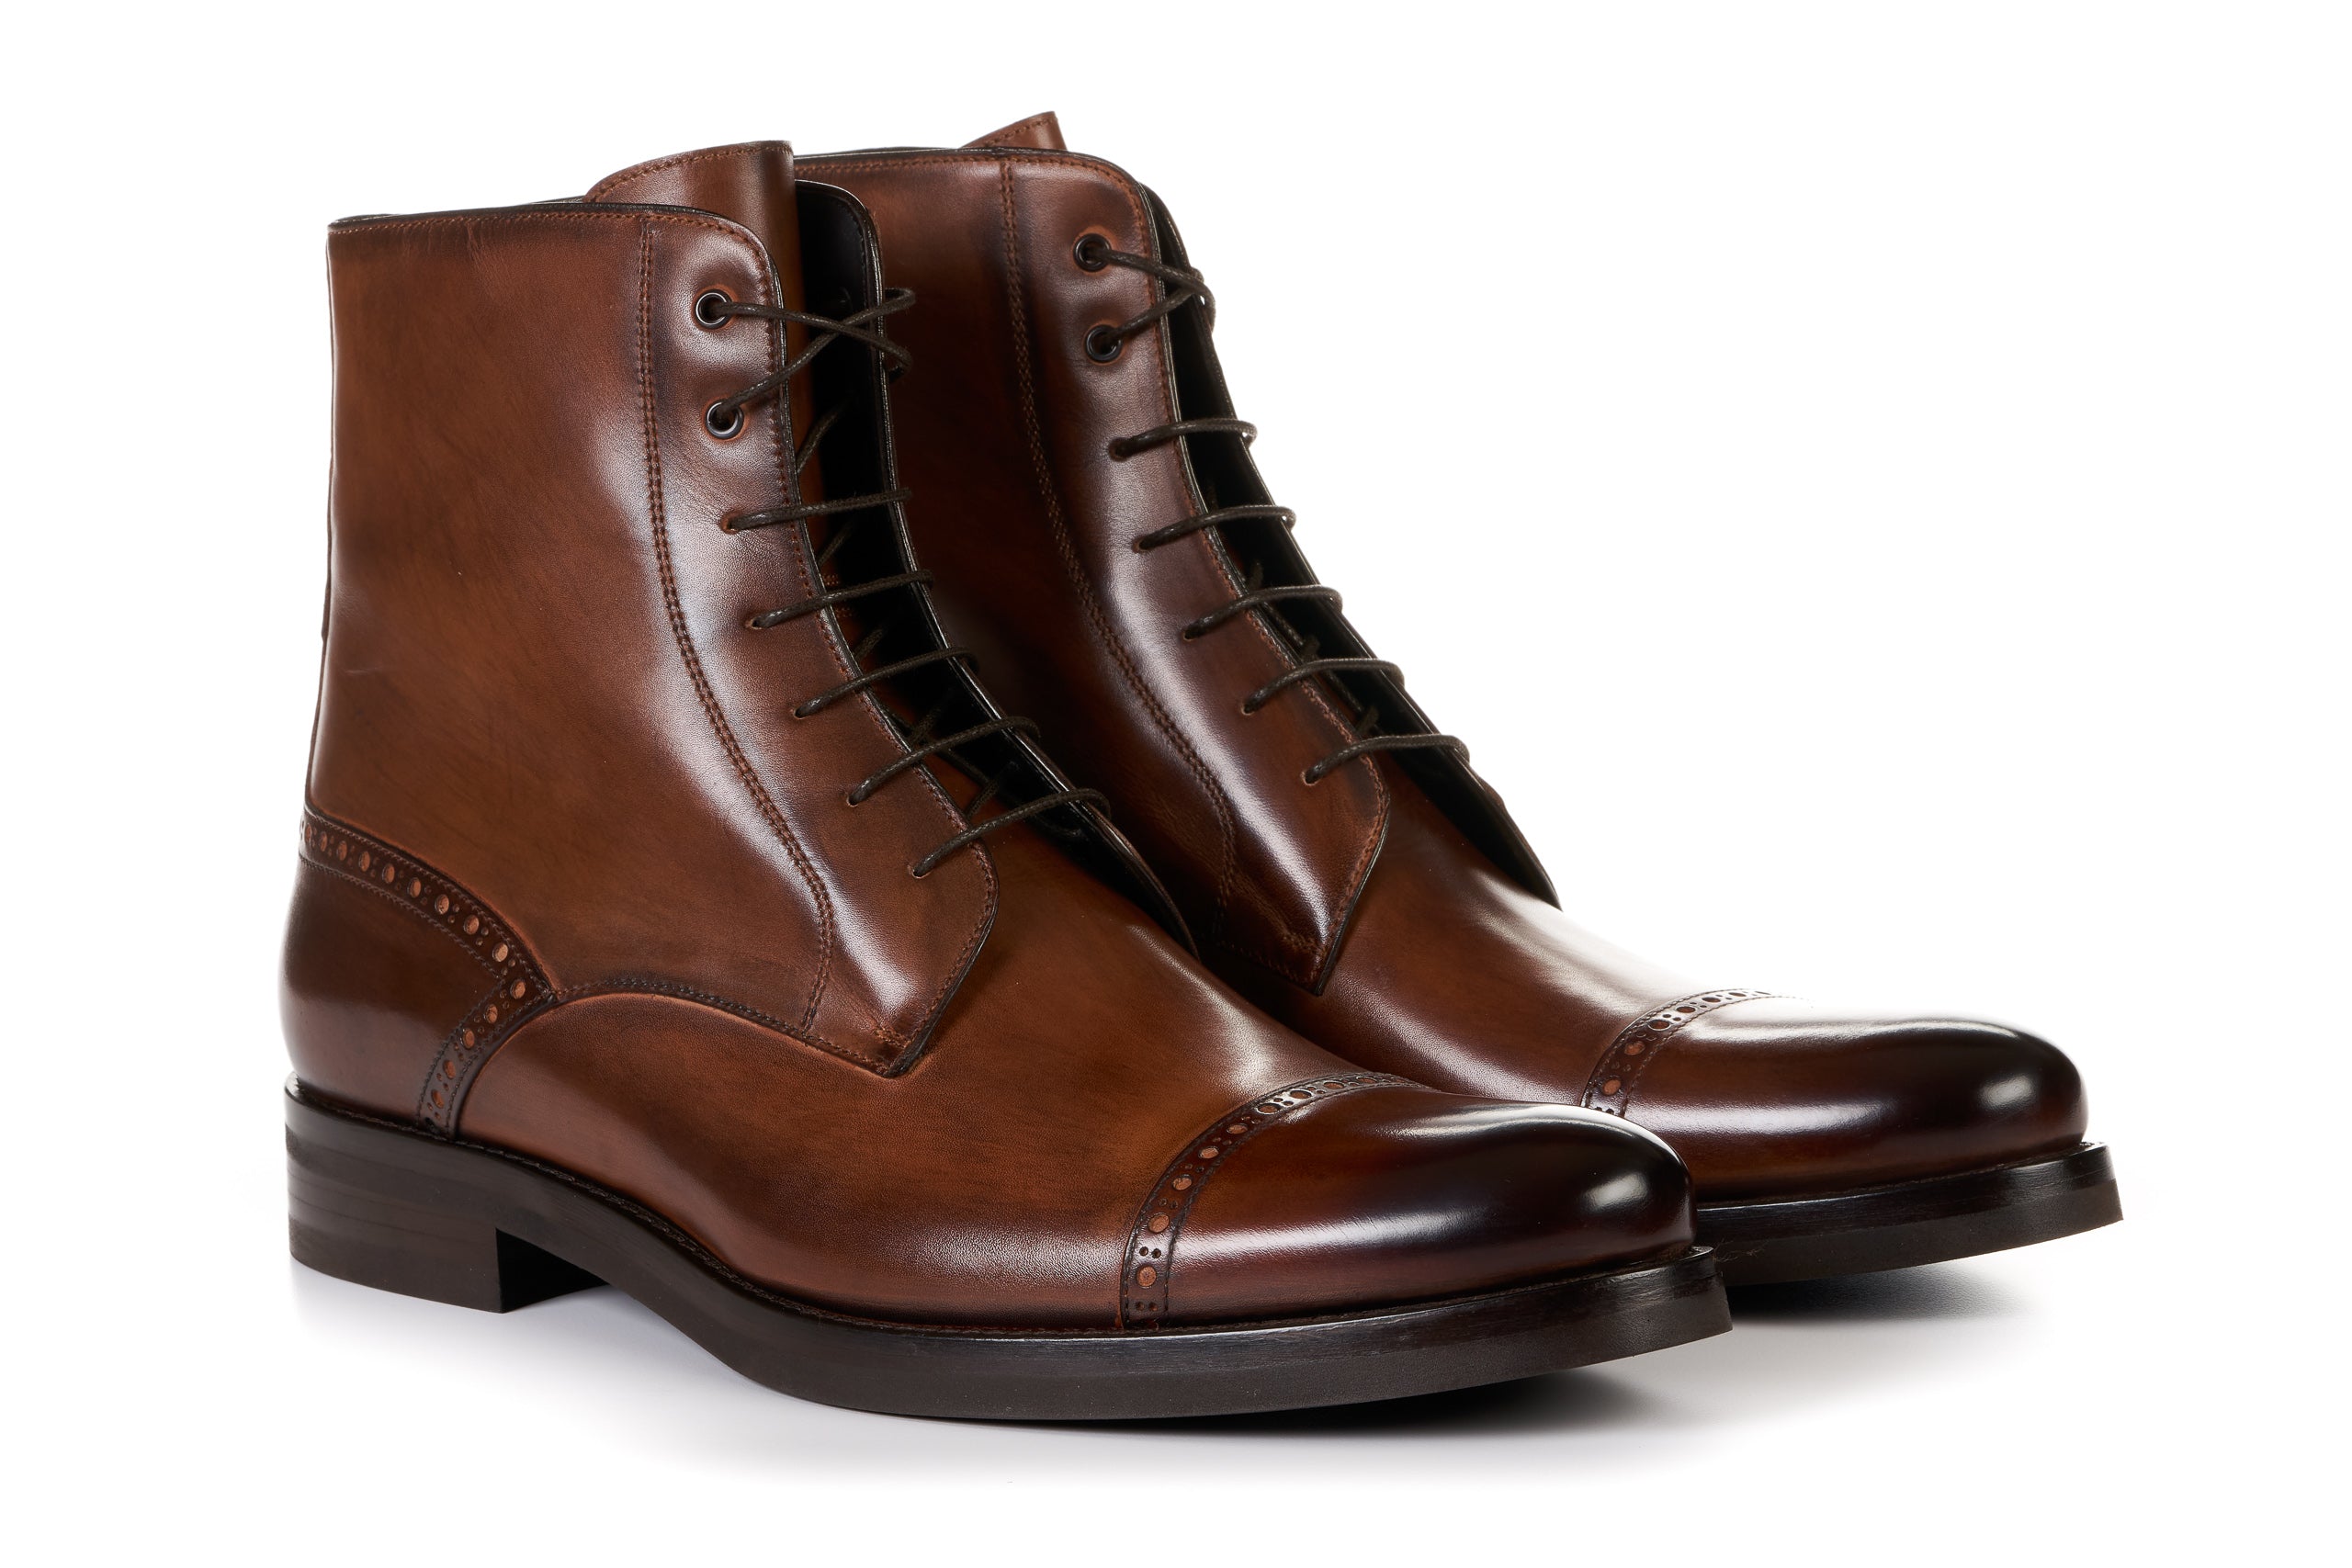 The Presley Lace-Up Boot - Brown - Rubber Sole